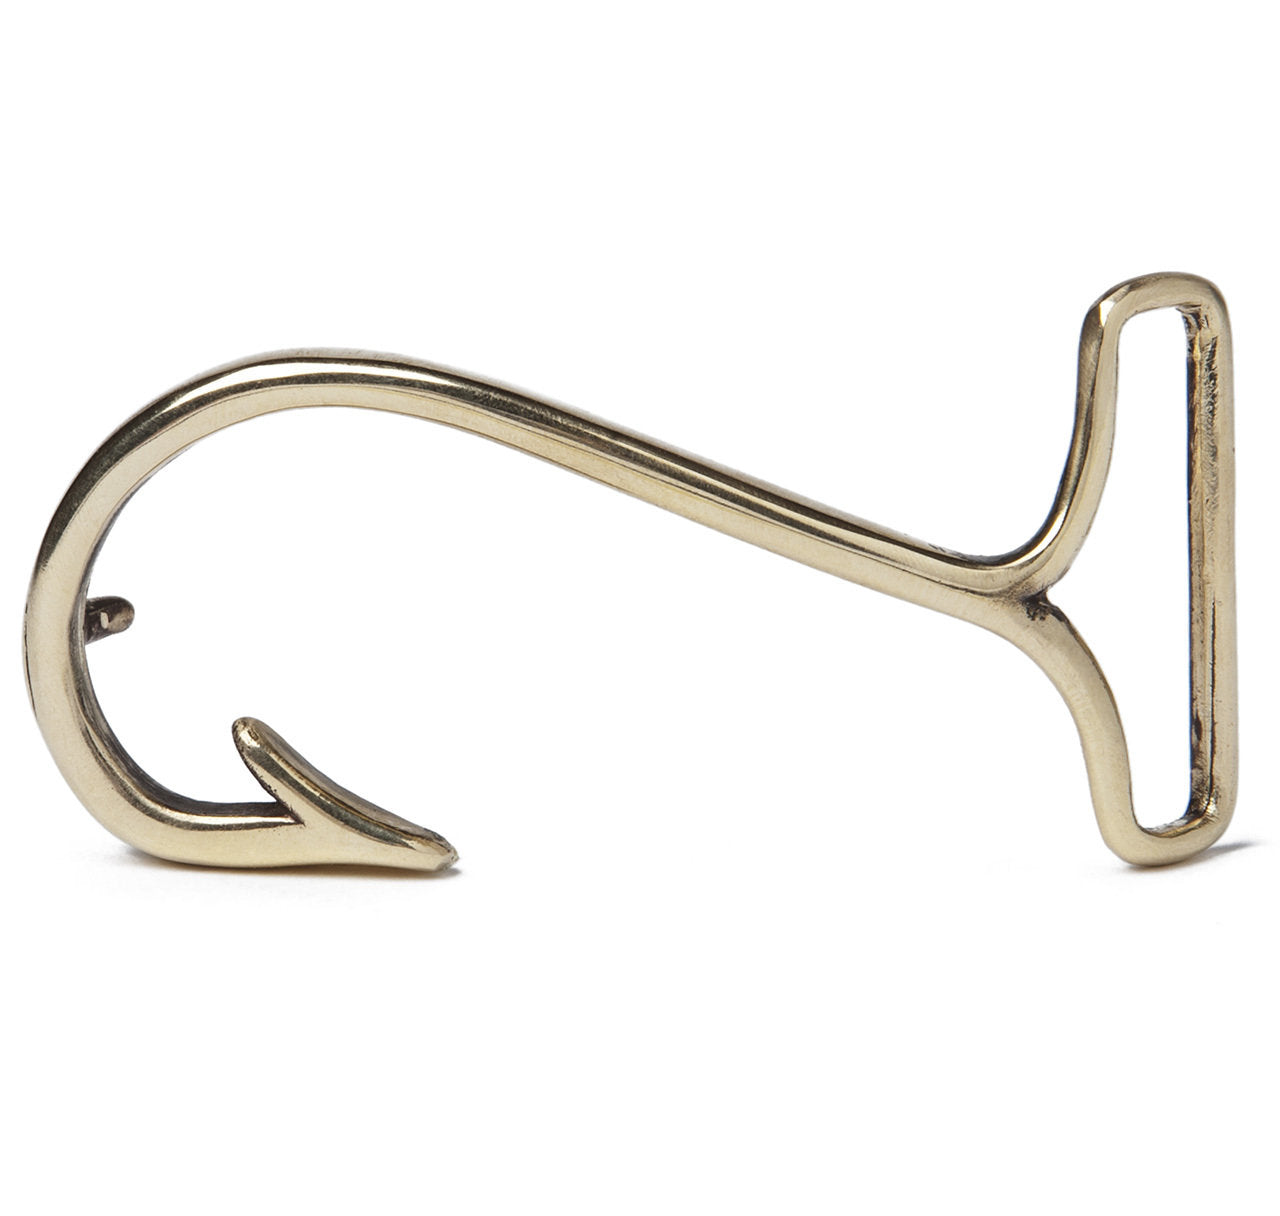 Sir Jack's Fish Hook Buckle with Brown Leather Belt